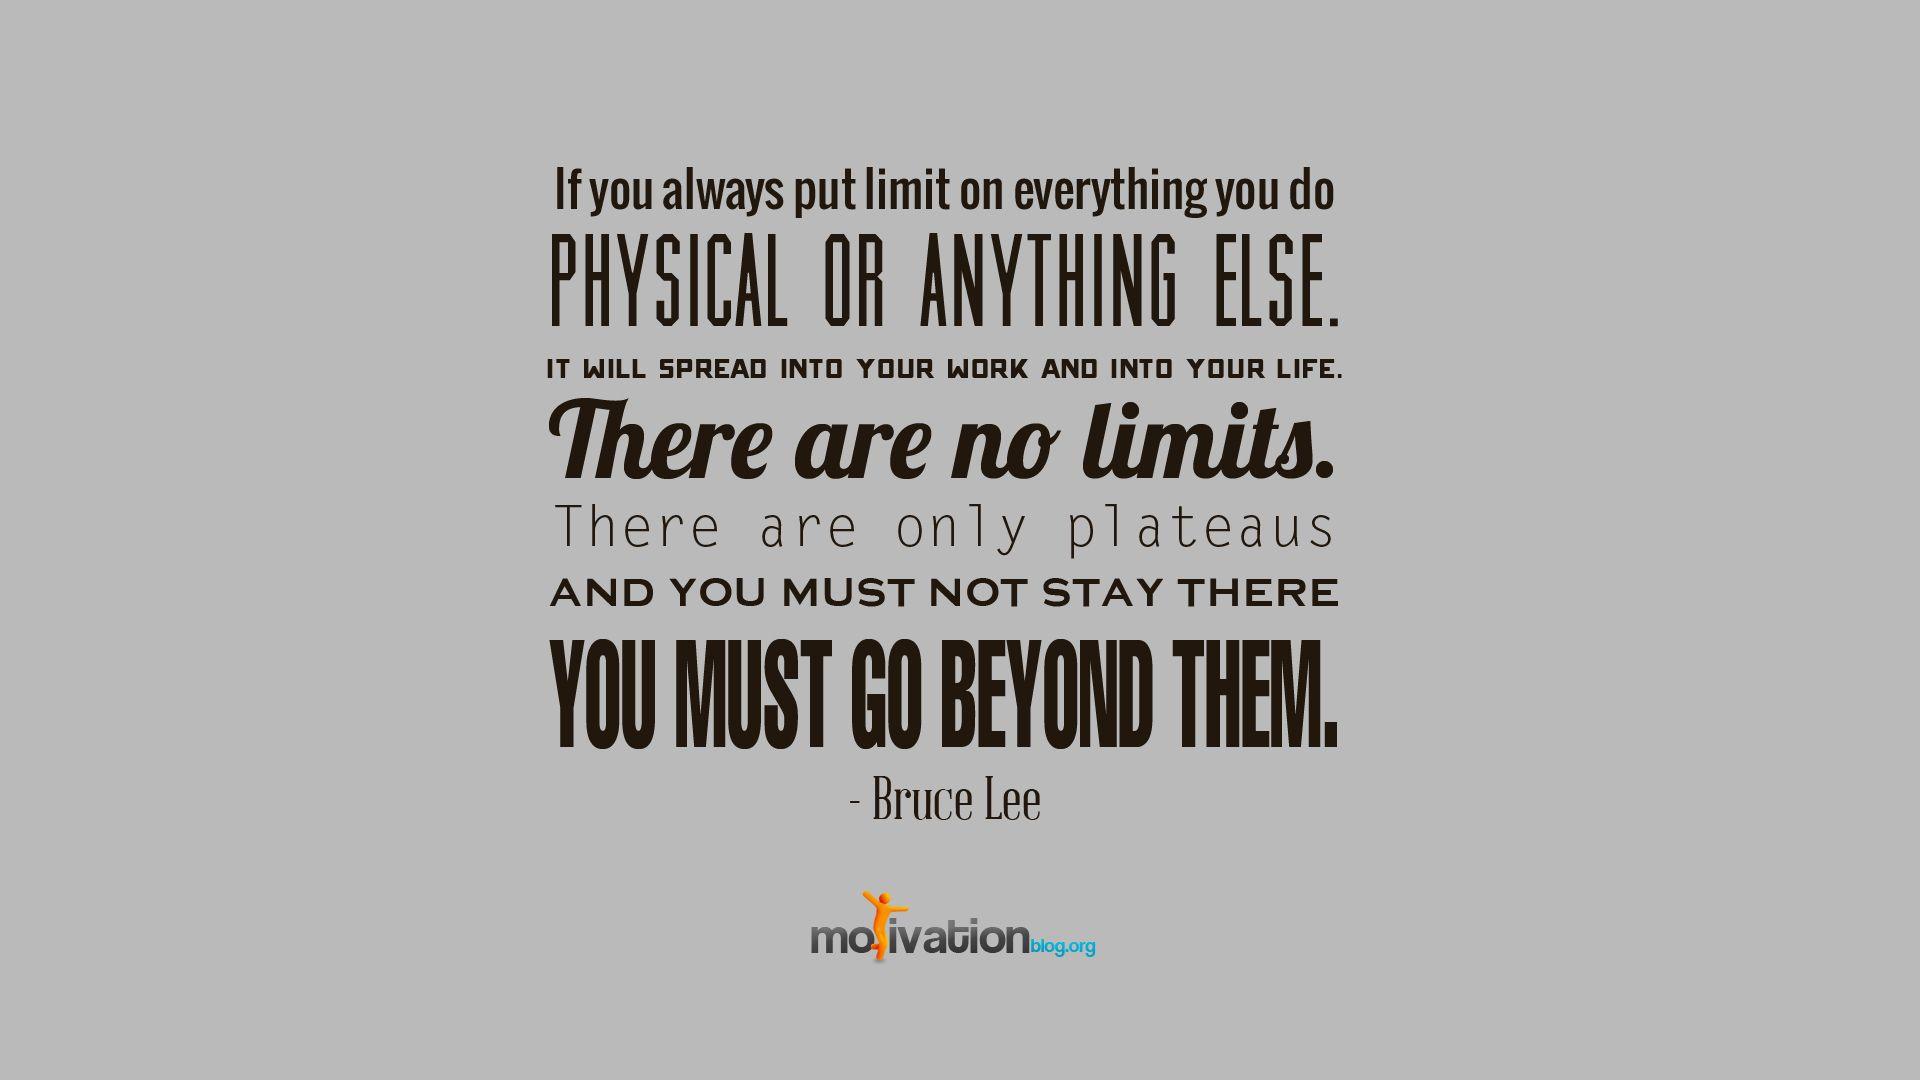 Motivational quotes and posters. Bruce Lee quotes wallpaper